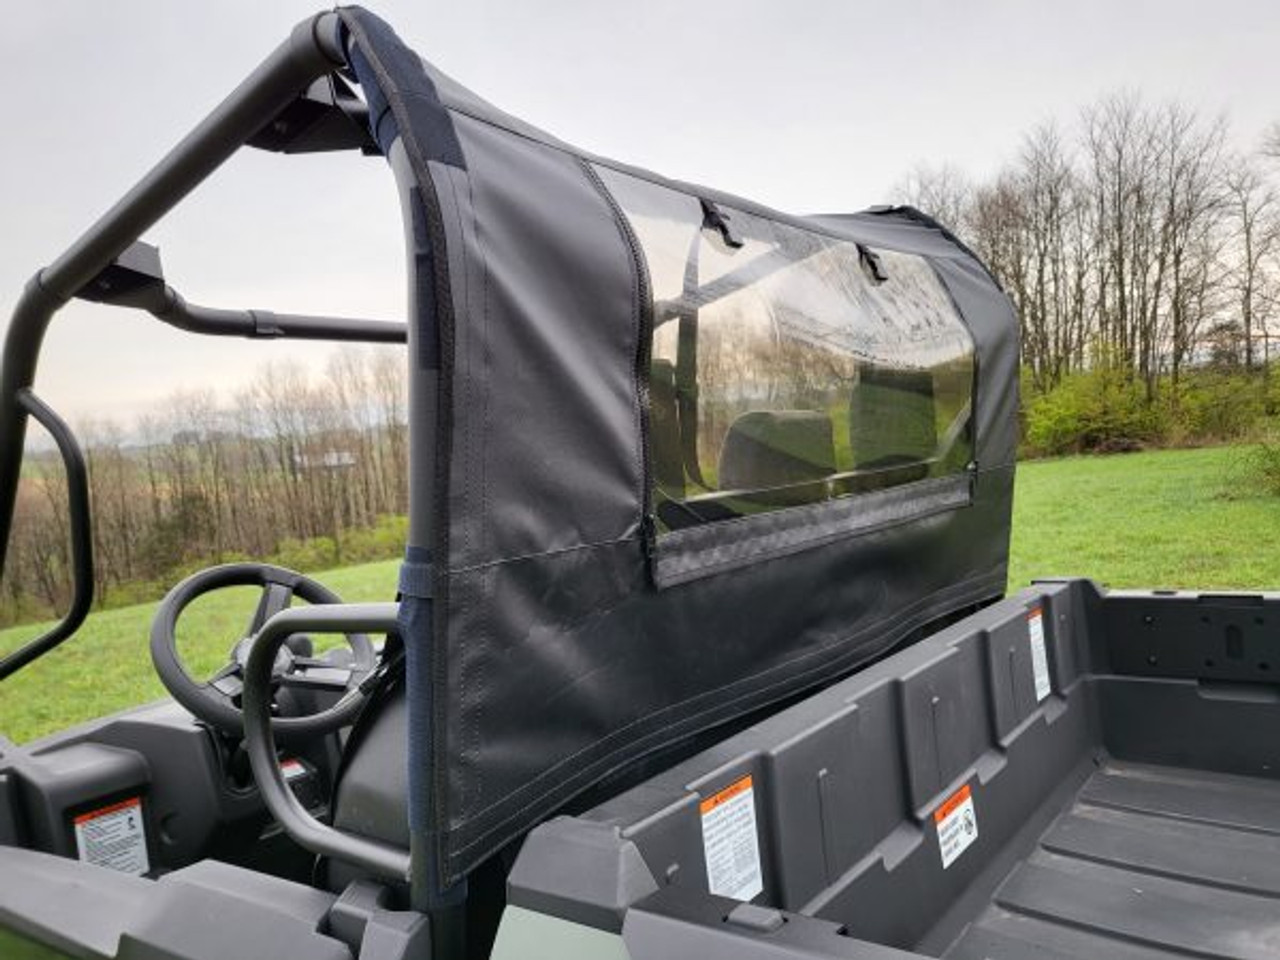 3 Star side x side Intimidator GC1K soft rear window rear and side angle view